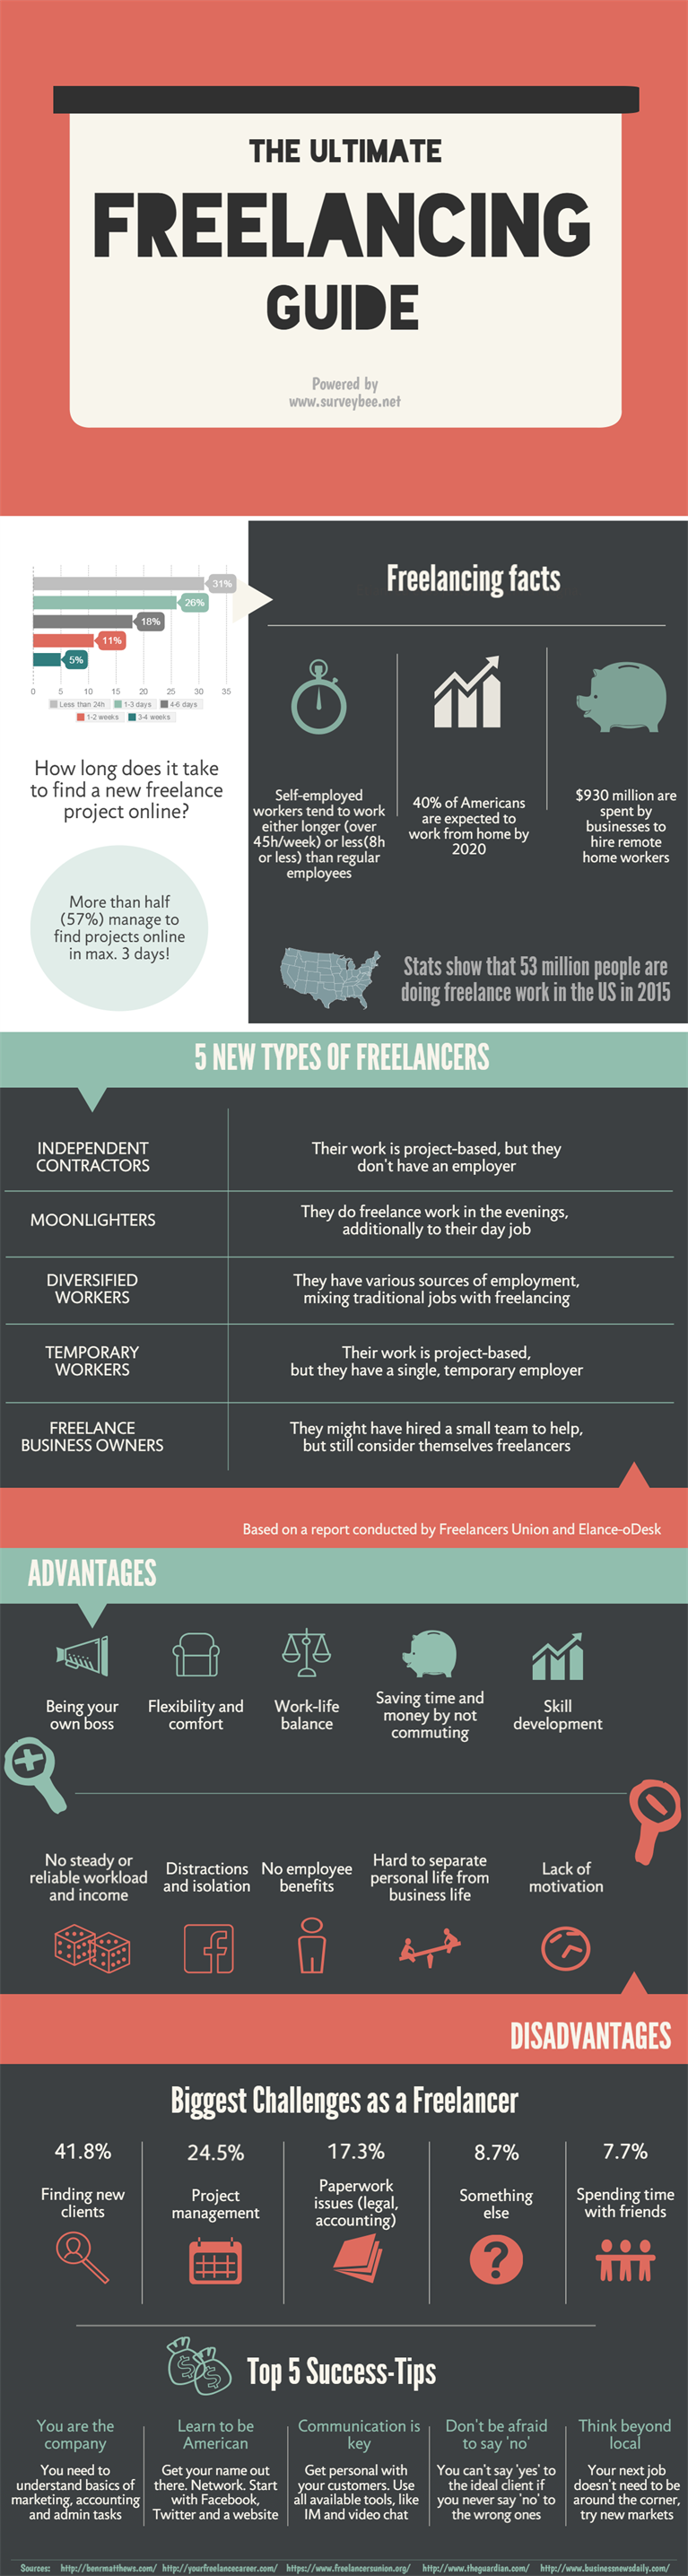 The-Ultimate-Freelancing-Guide-infographic